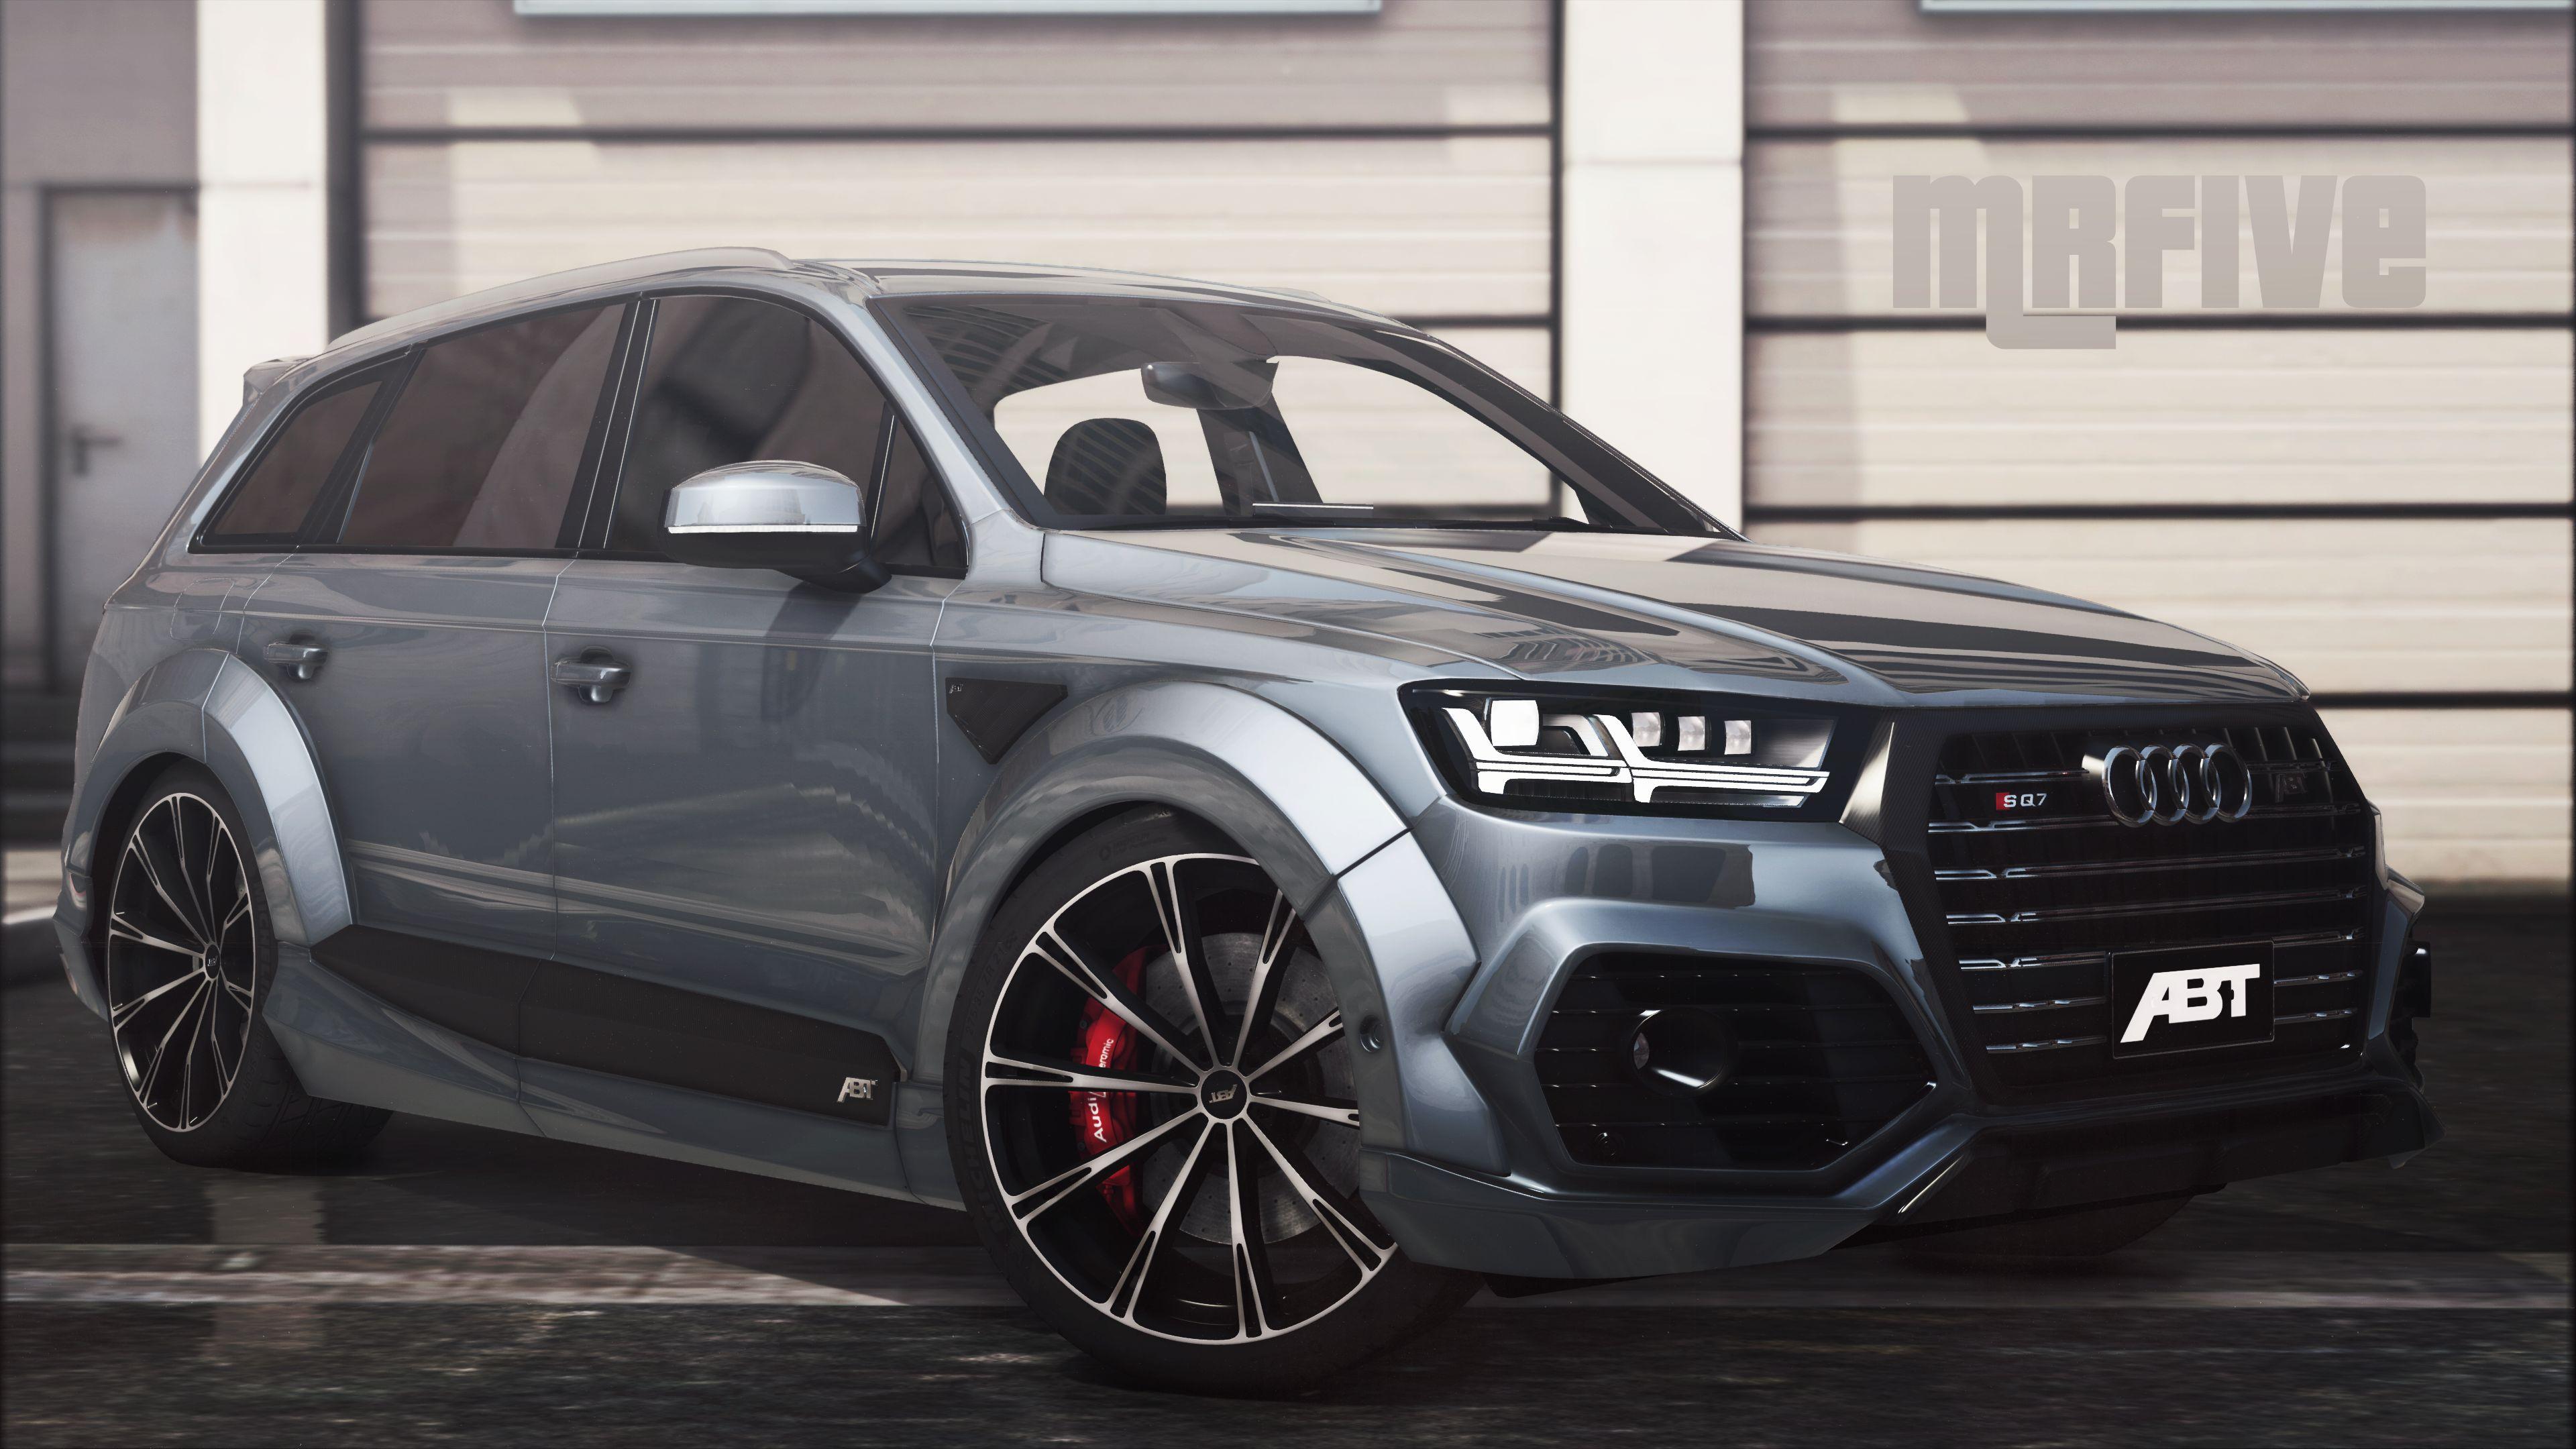 Audi SQ7 exterior restyling